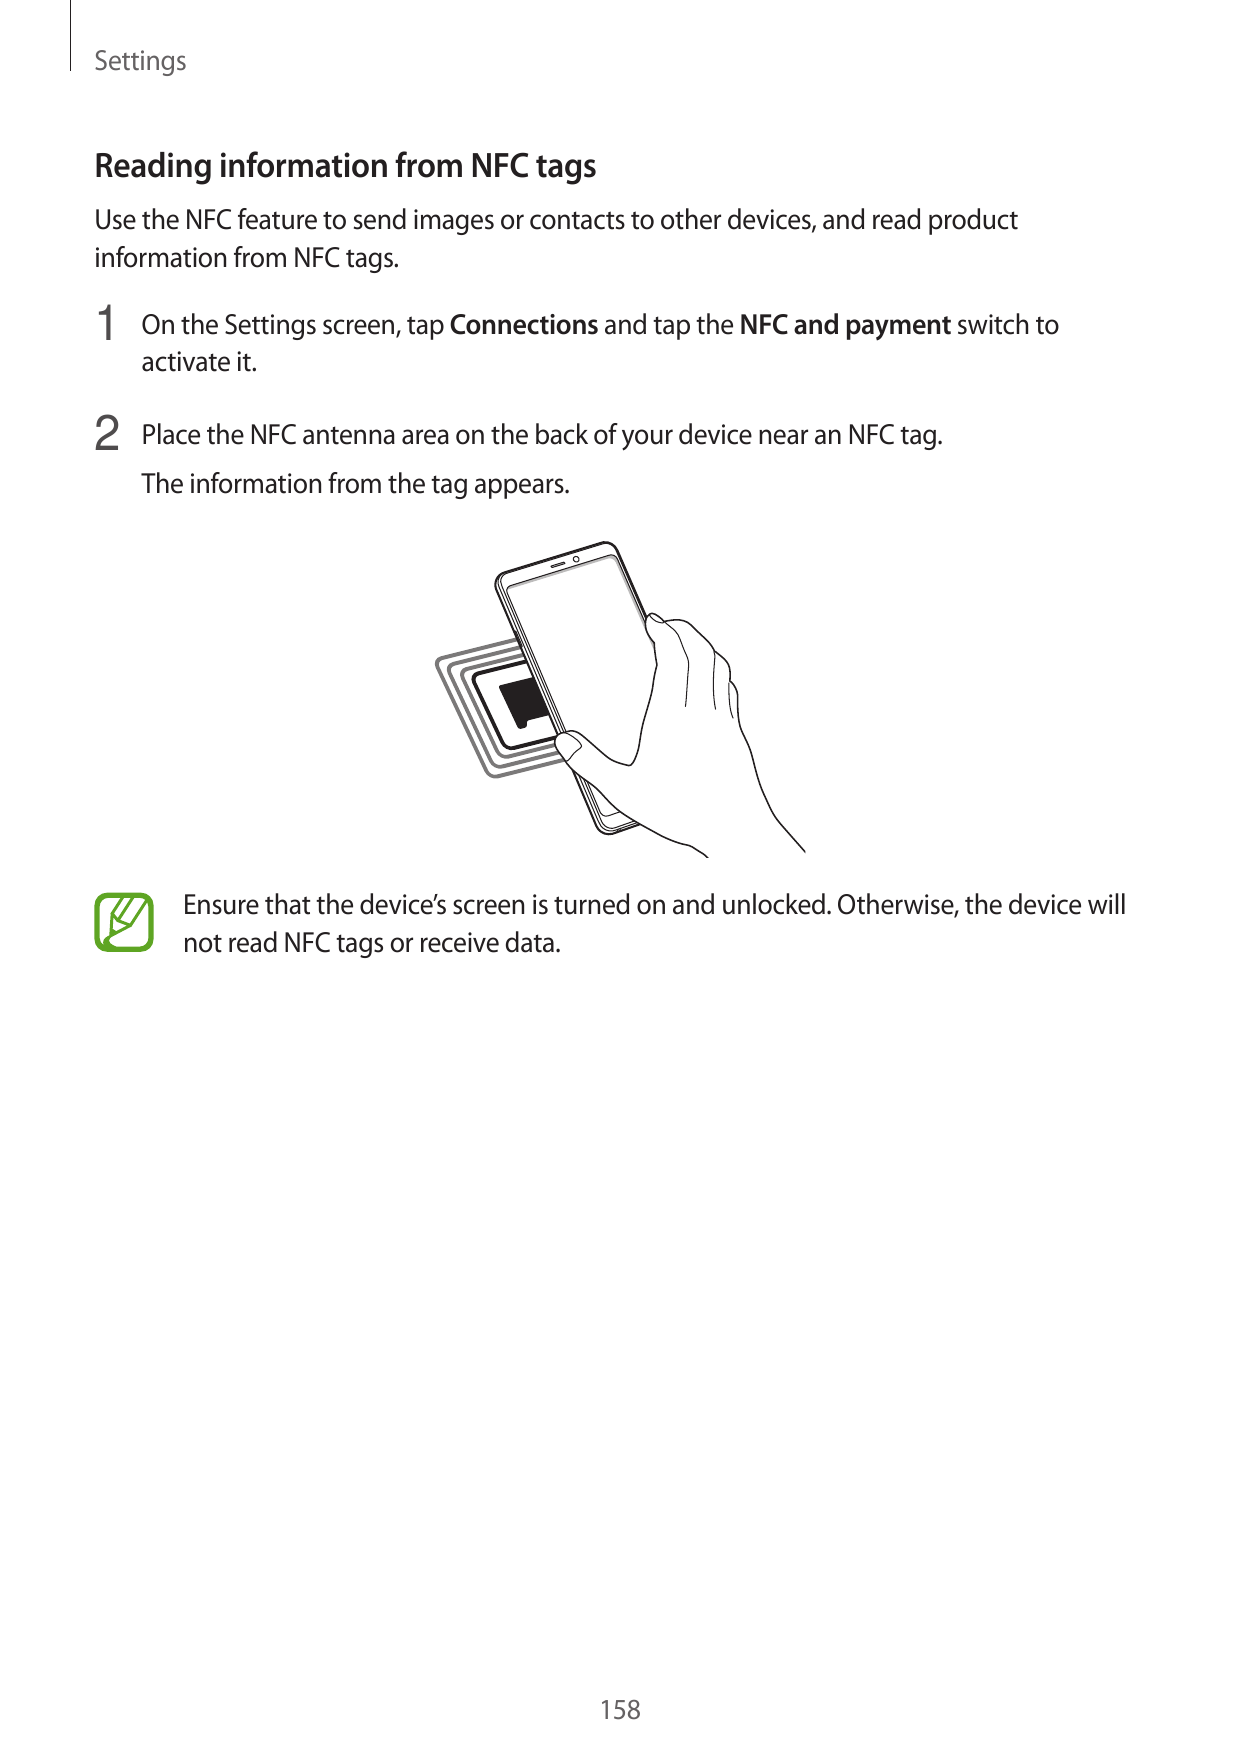 SettingsReading information from NFC tagsUse the NFC feature to send images or contacts to other devices, and read productinform